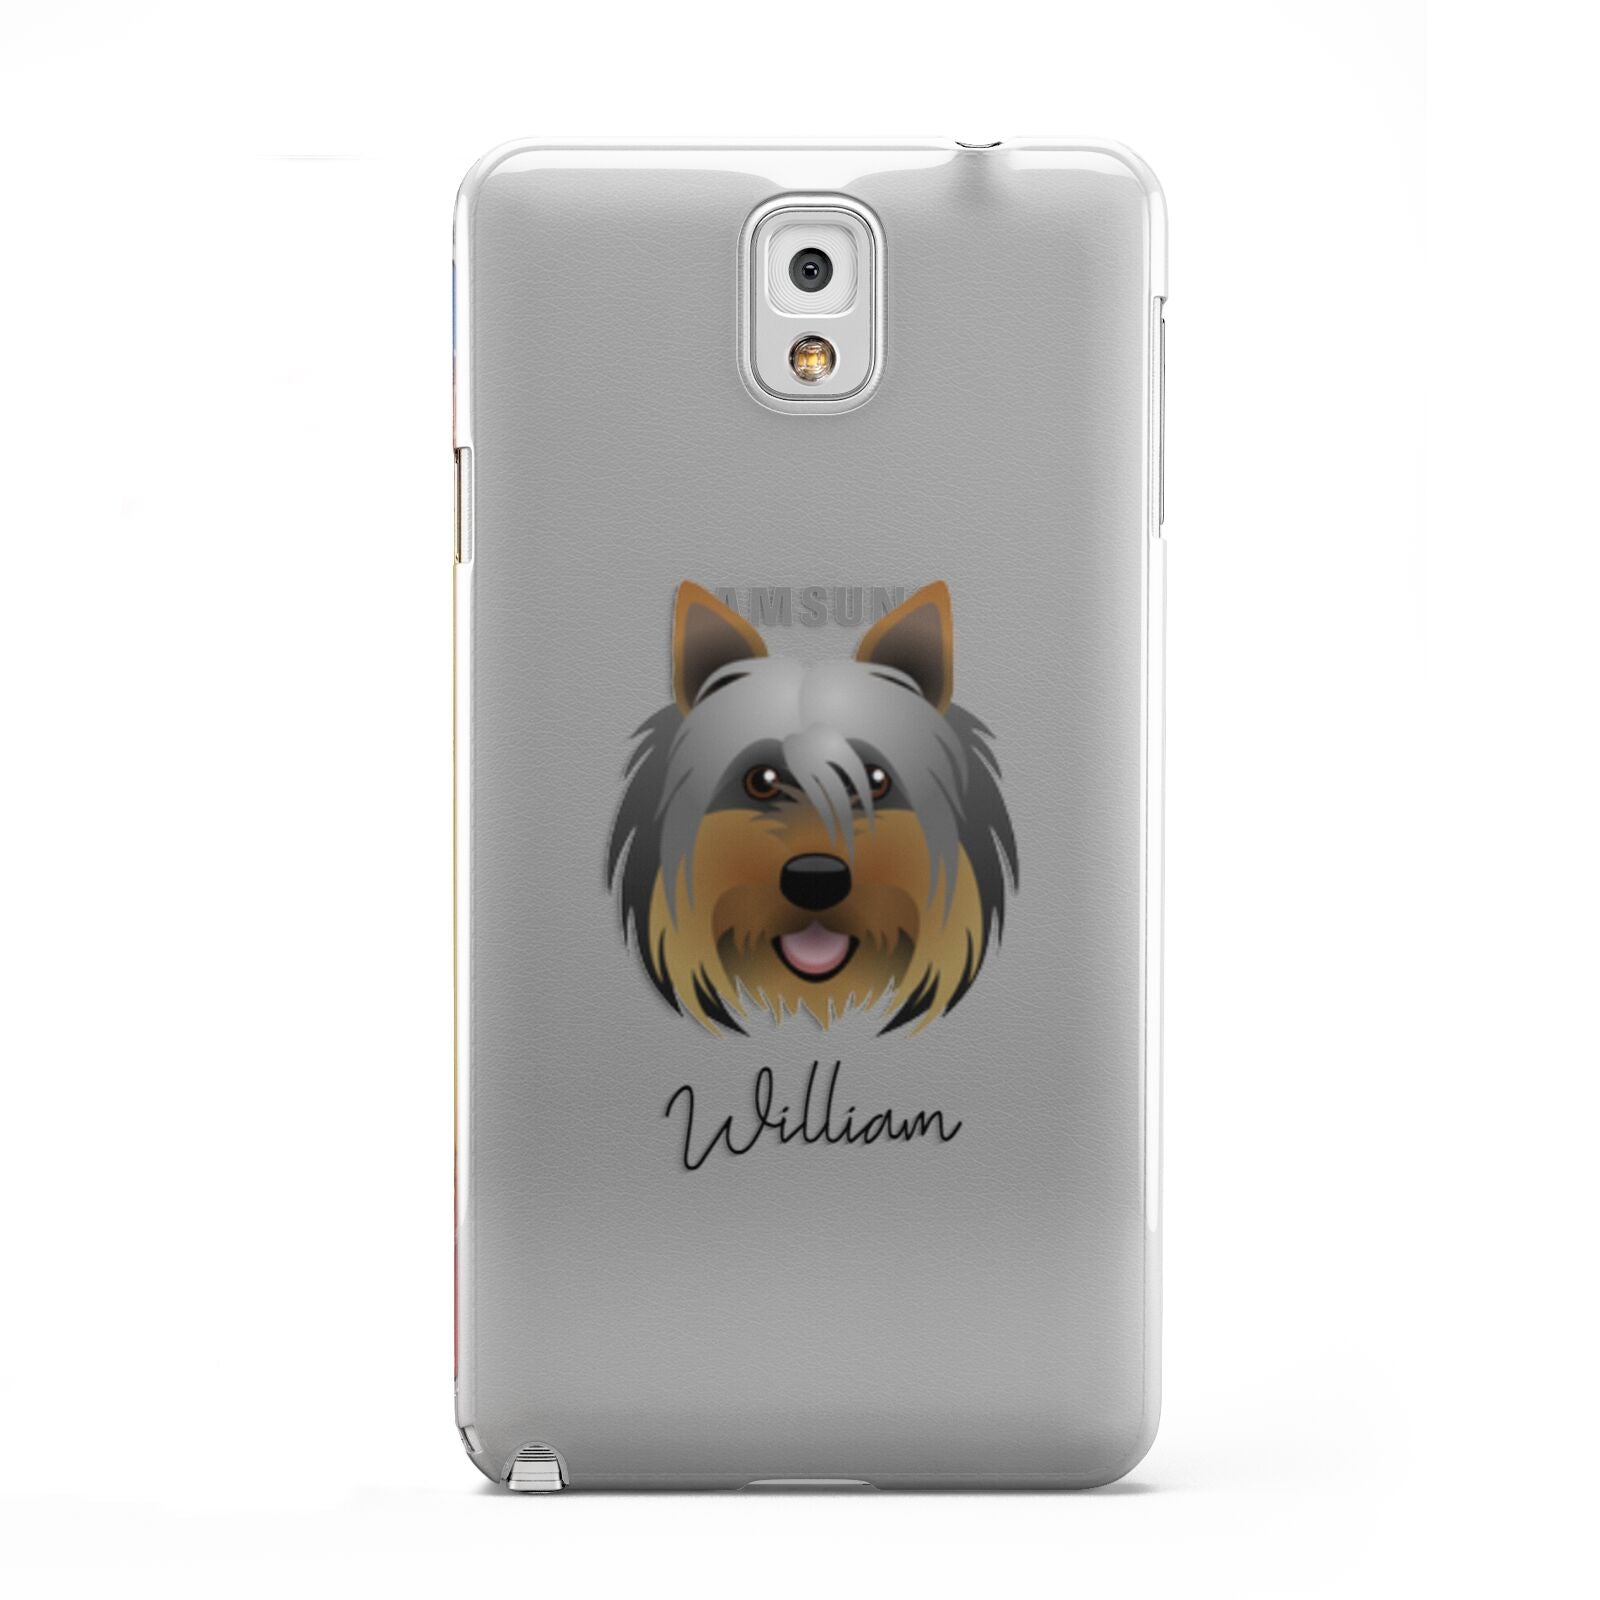 Yorkshire Terrier Personalised Samsung Galaxy Note 3 Case